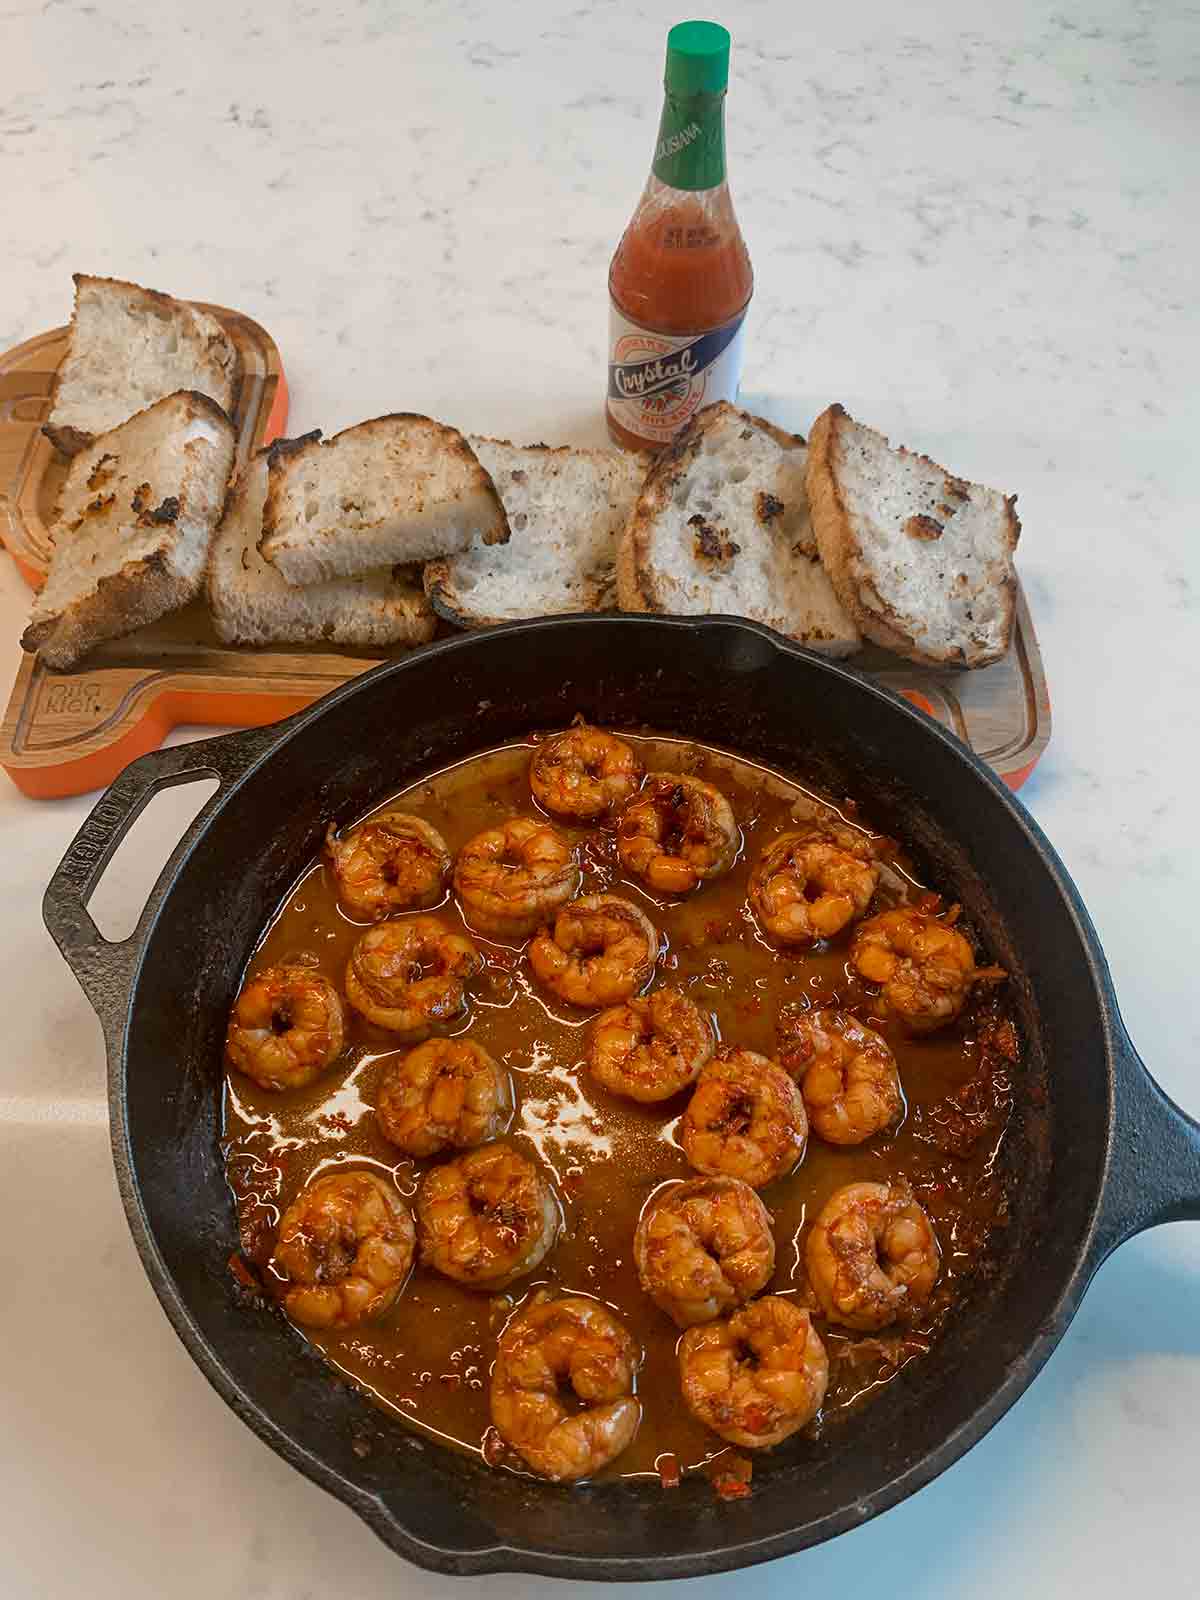 A large cast-iron skillet filled with shrimp in a dark red sauce, beside a cutting board with toasted slices of bread and a bottle of hot sauce.